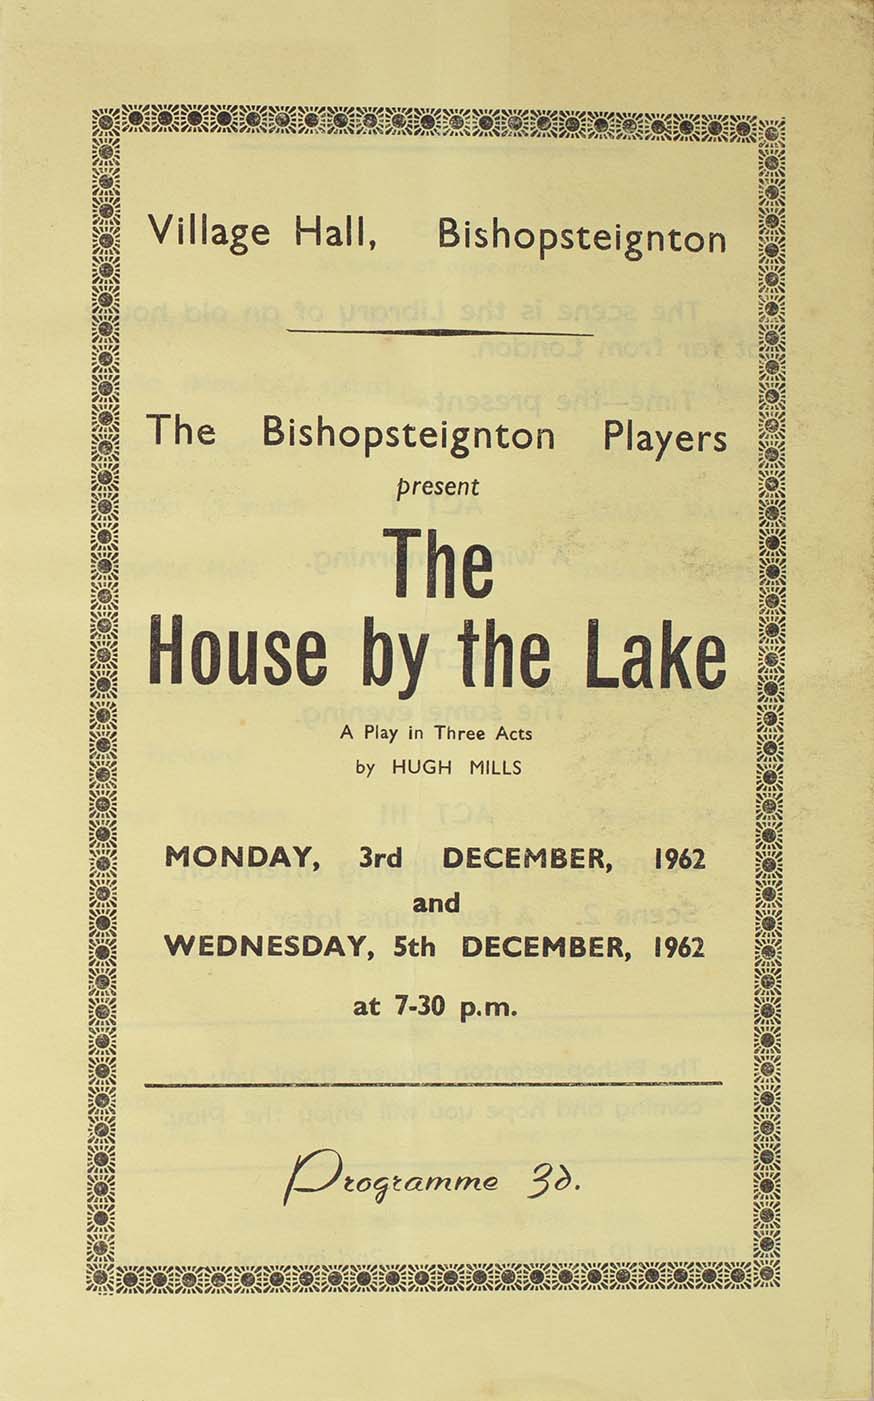 Leaflet to advertise the programme for the play 'The House by the Lake' presented by the Bishopsteignton Players front